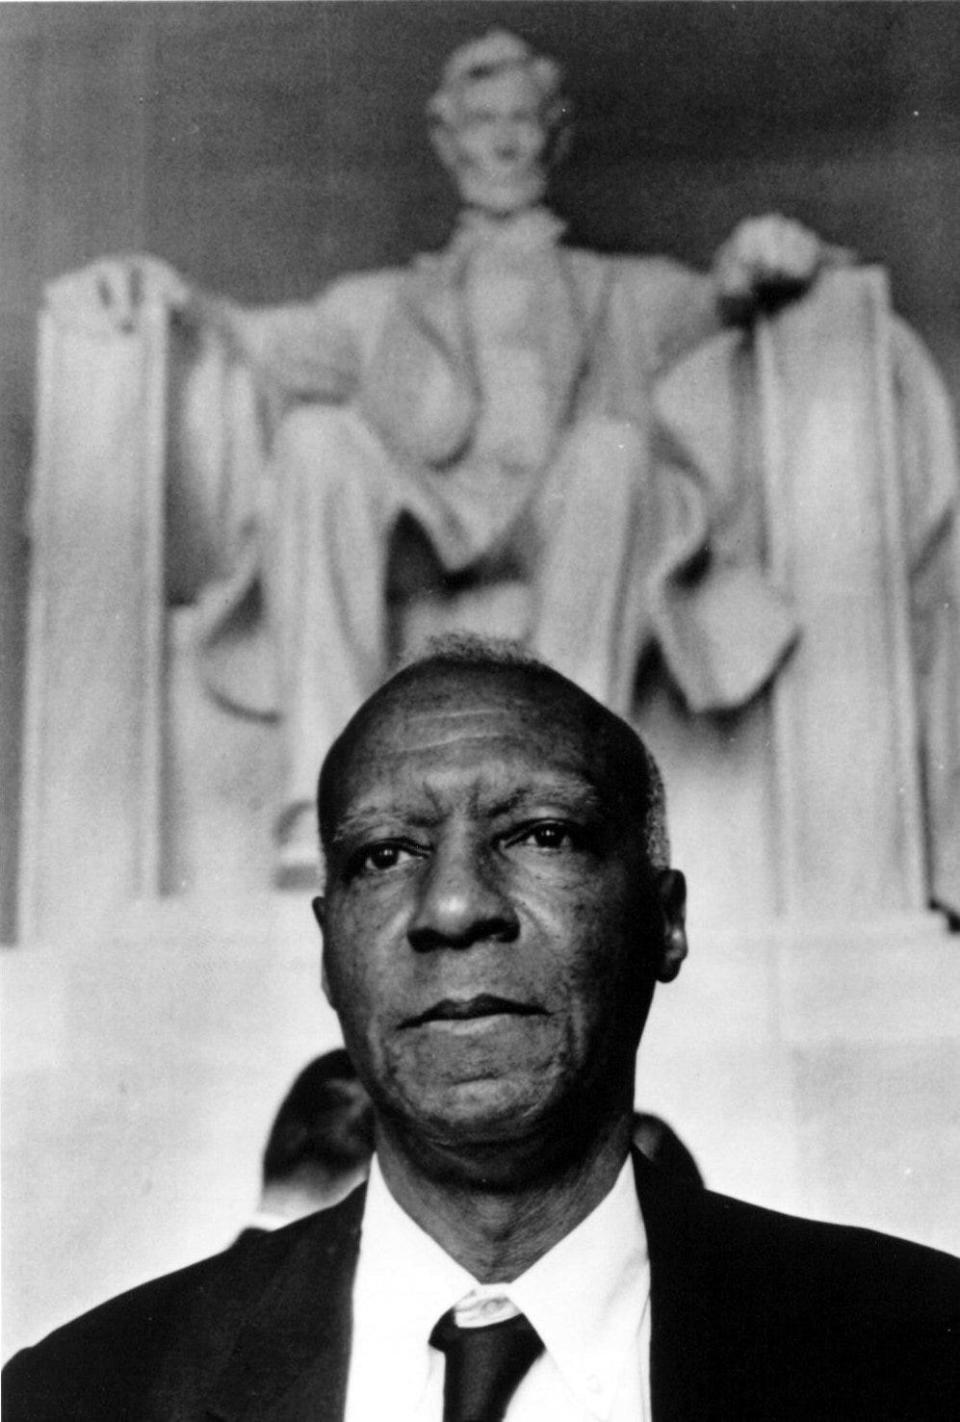 A. Philip Randolph, a Florida-born labor leader and civil rights pioneer, stands outside the Lincoln Memorial in Washington, D.C.